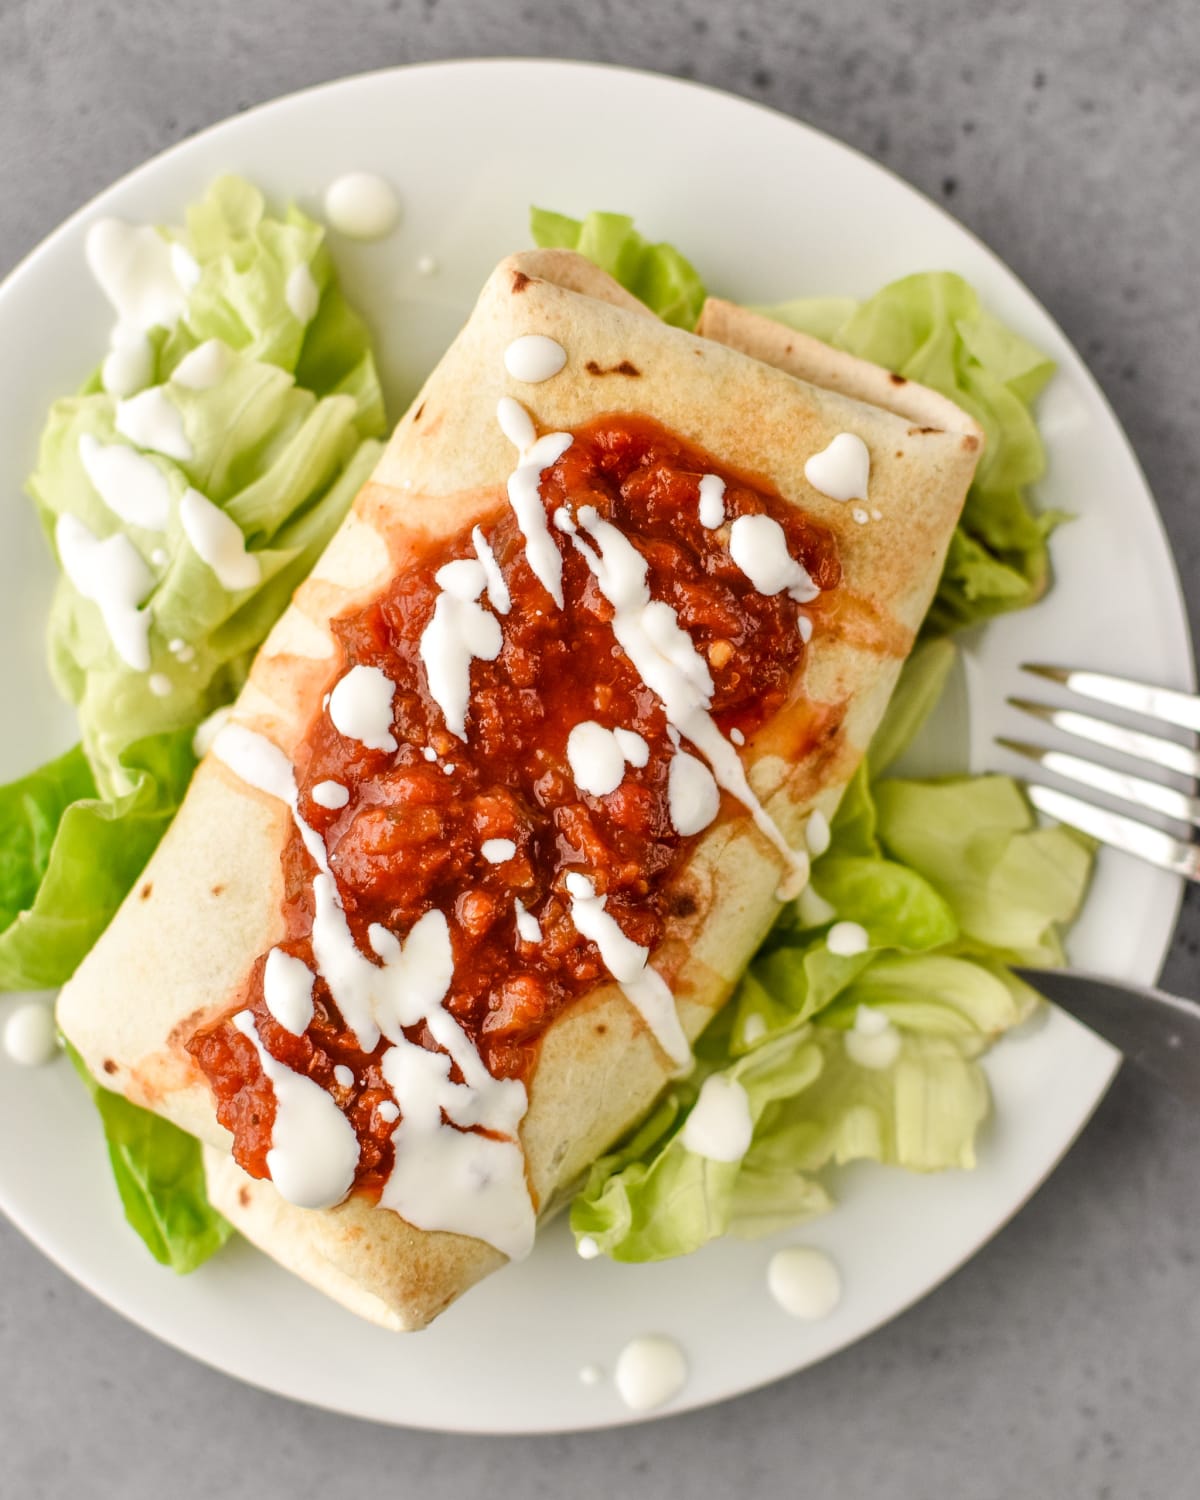 How to Make Chimichangas in an Air Fryer